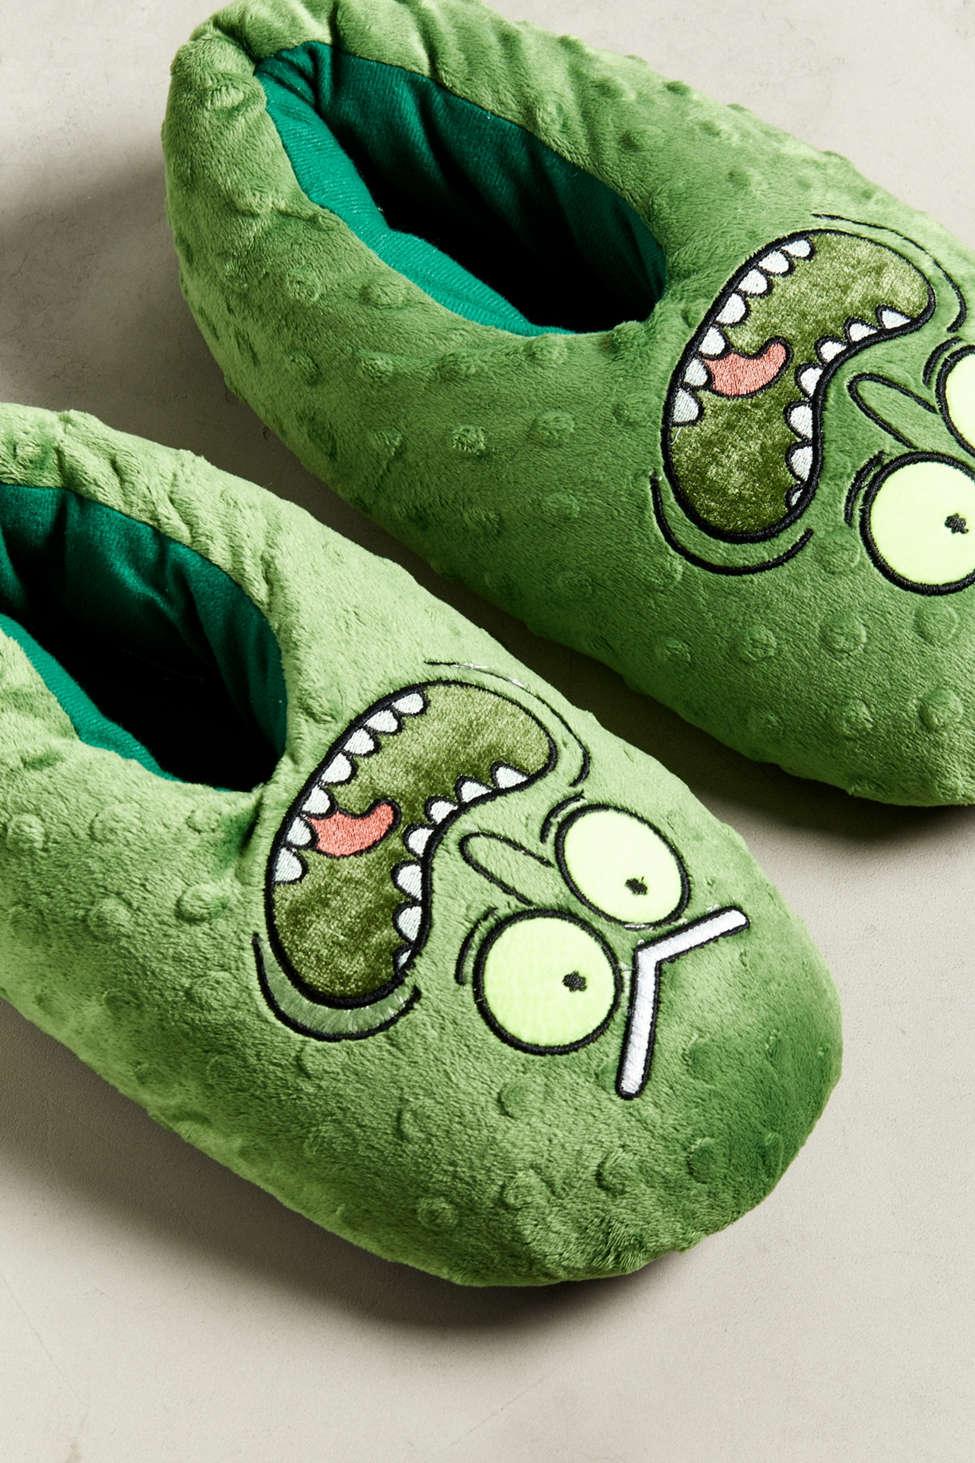 Pickle Rick Thumb 3D Printing Closed Toe Cotton Slippers Warm Soft Indoor Shoes Non-watertight 